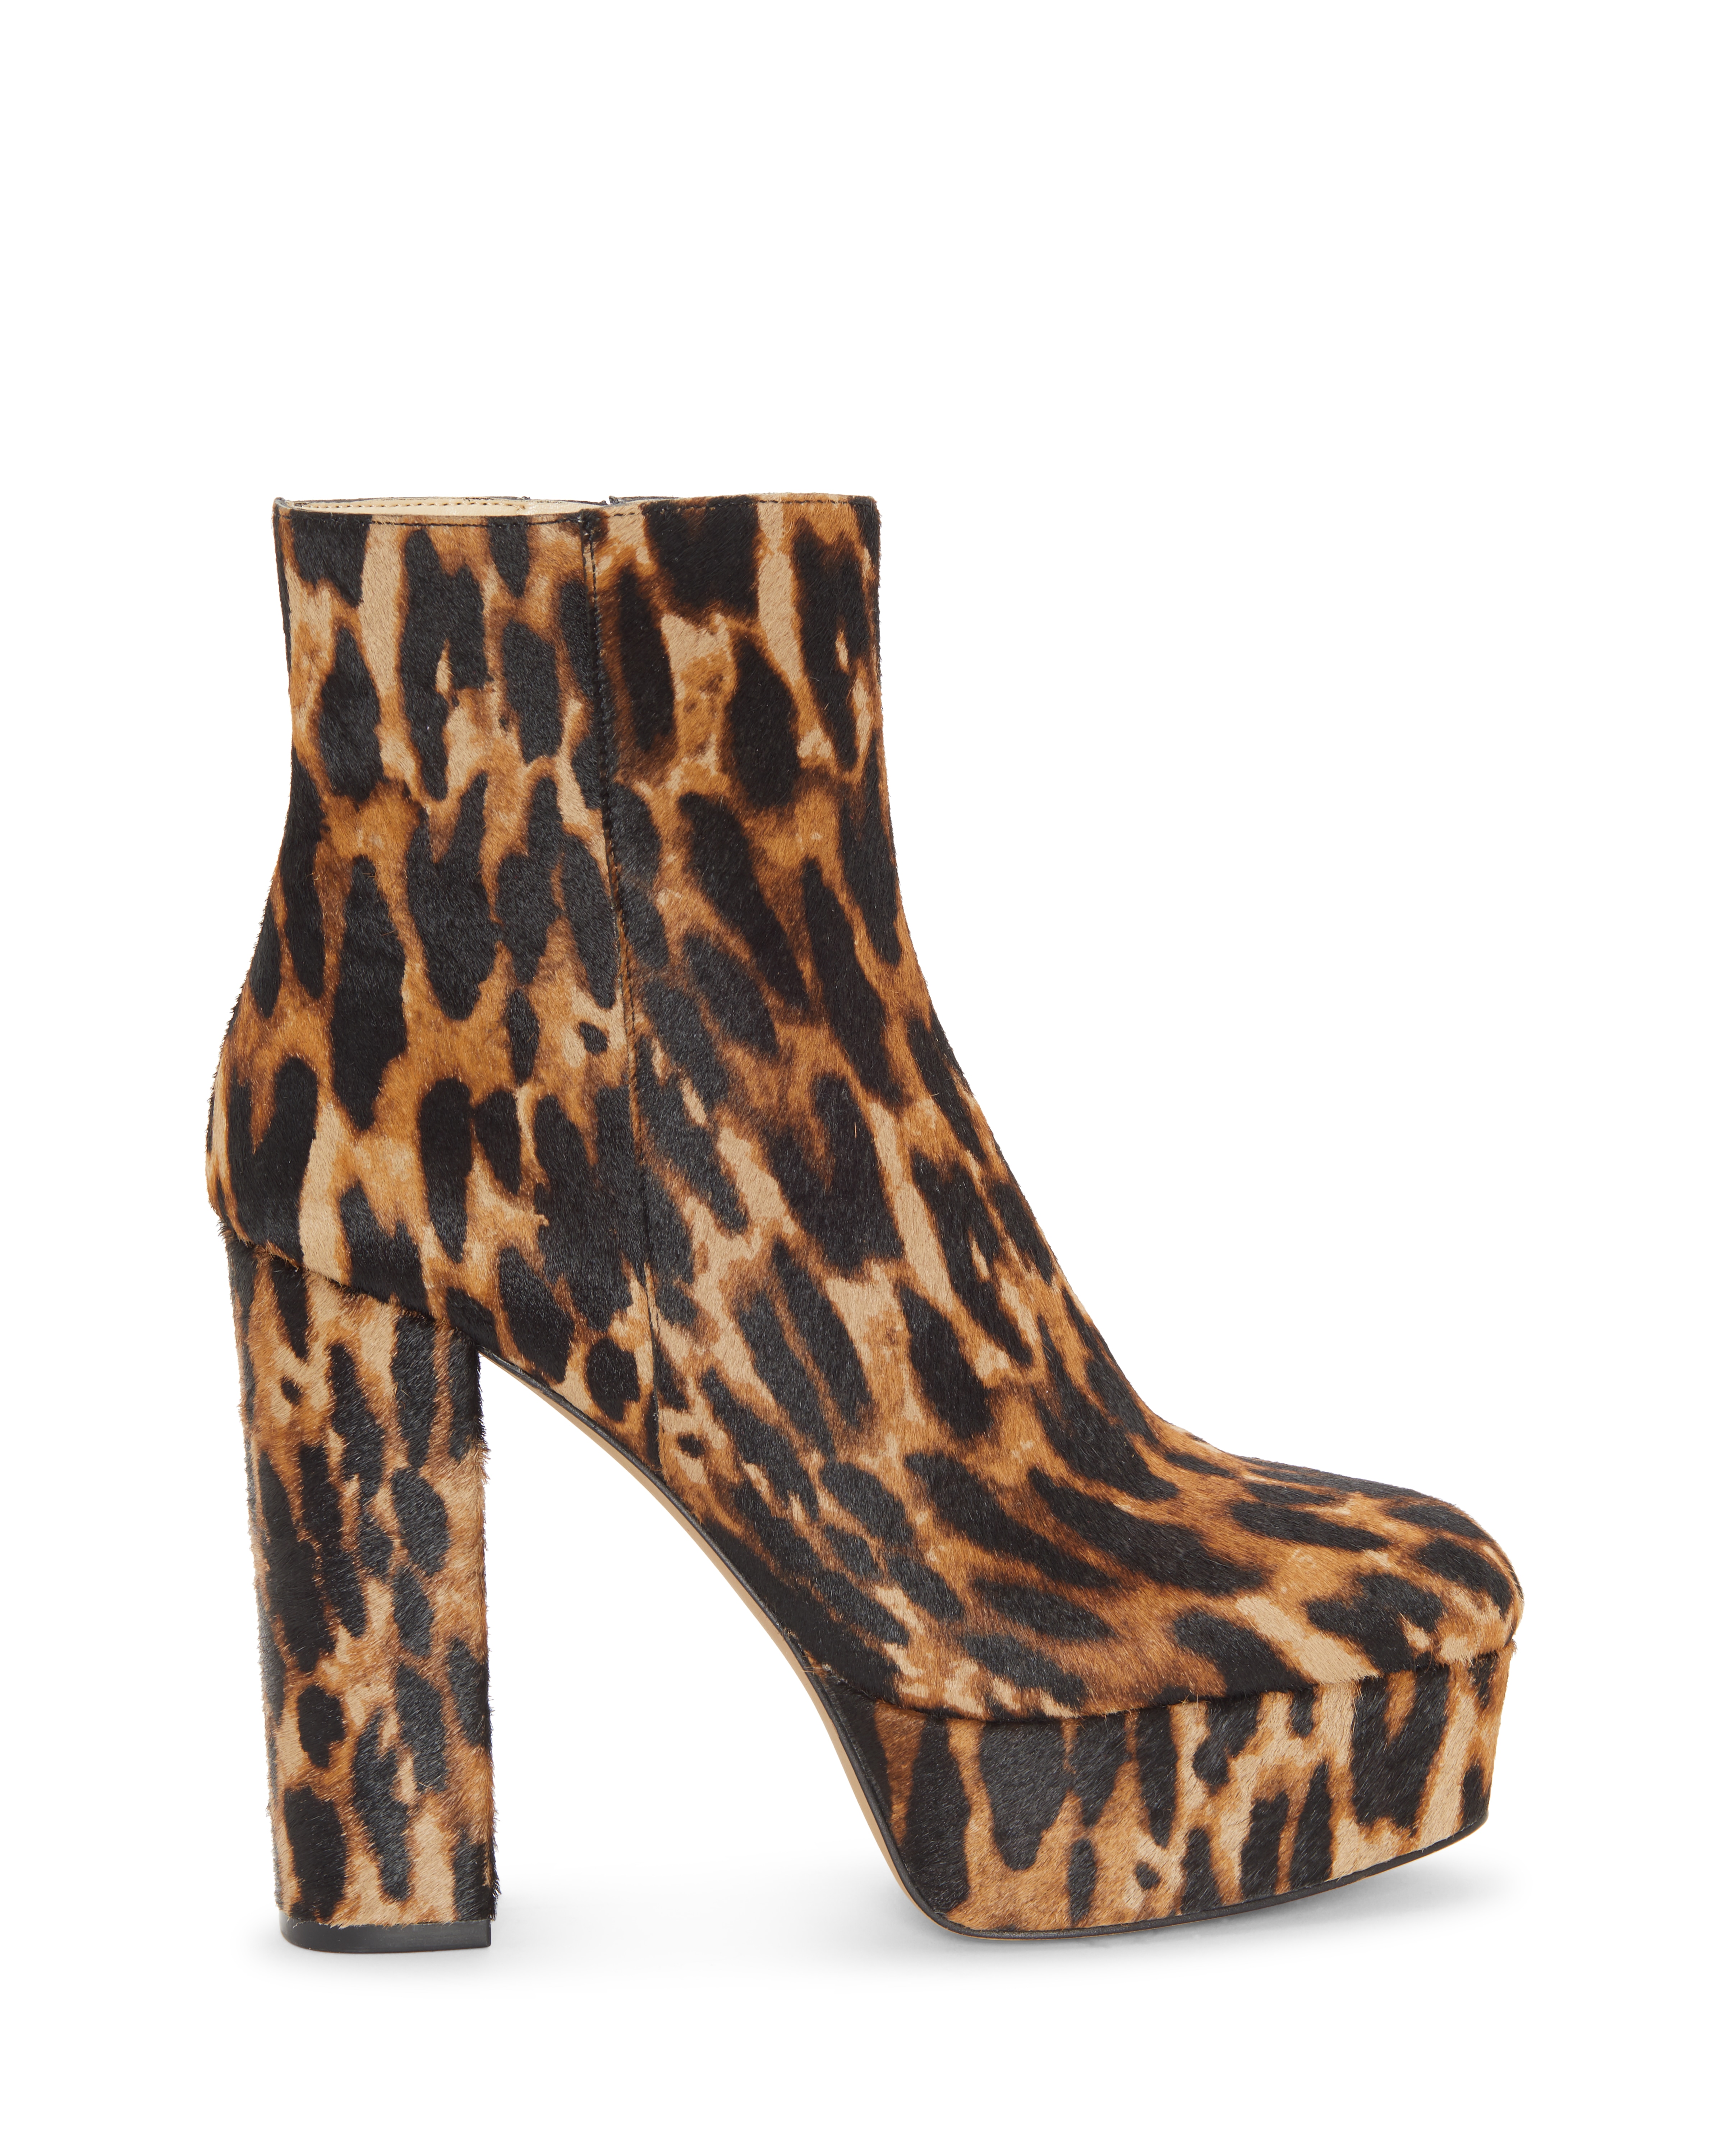 vince camuto leopard ankle boots